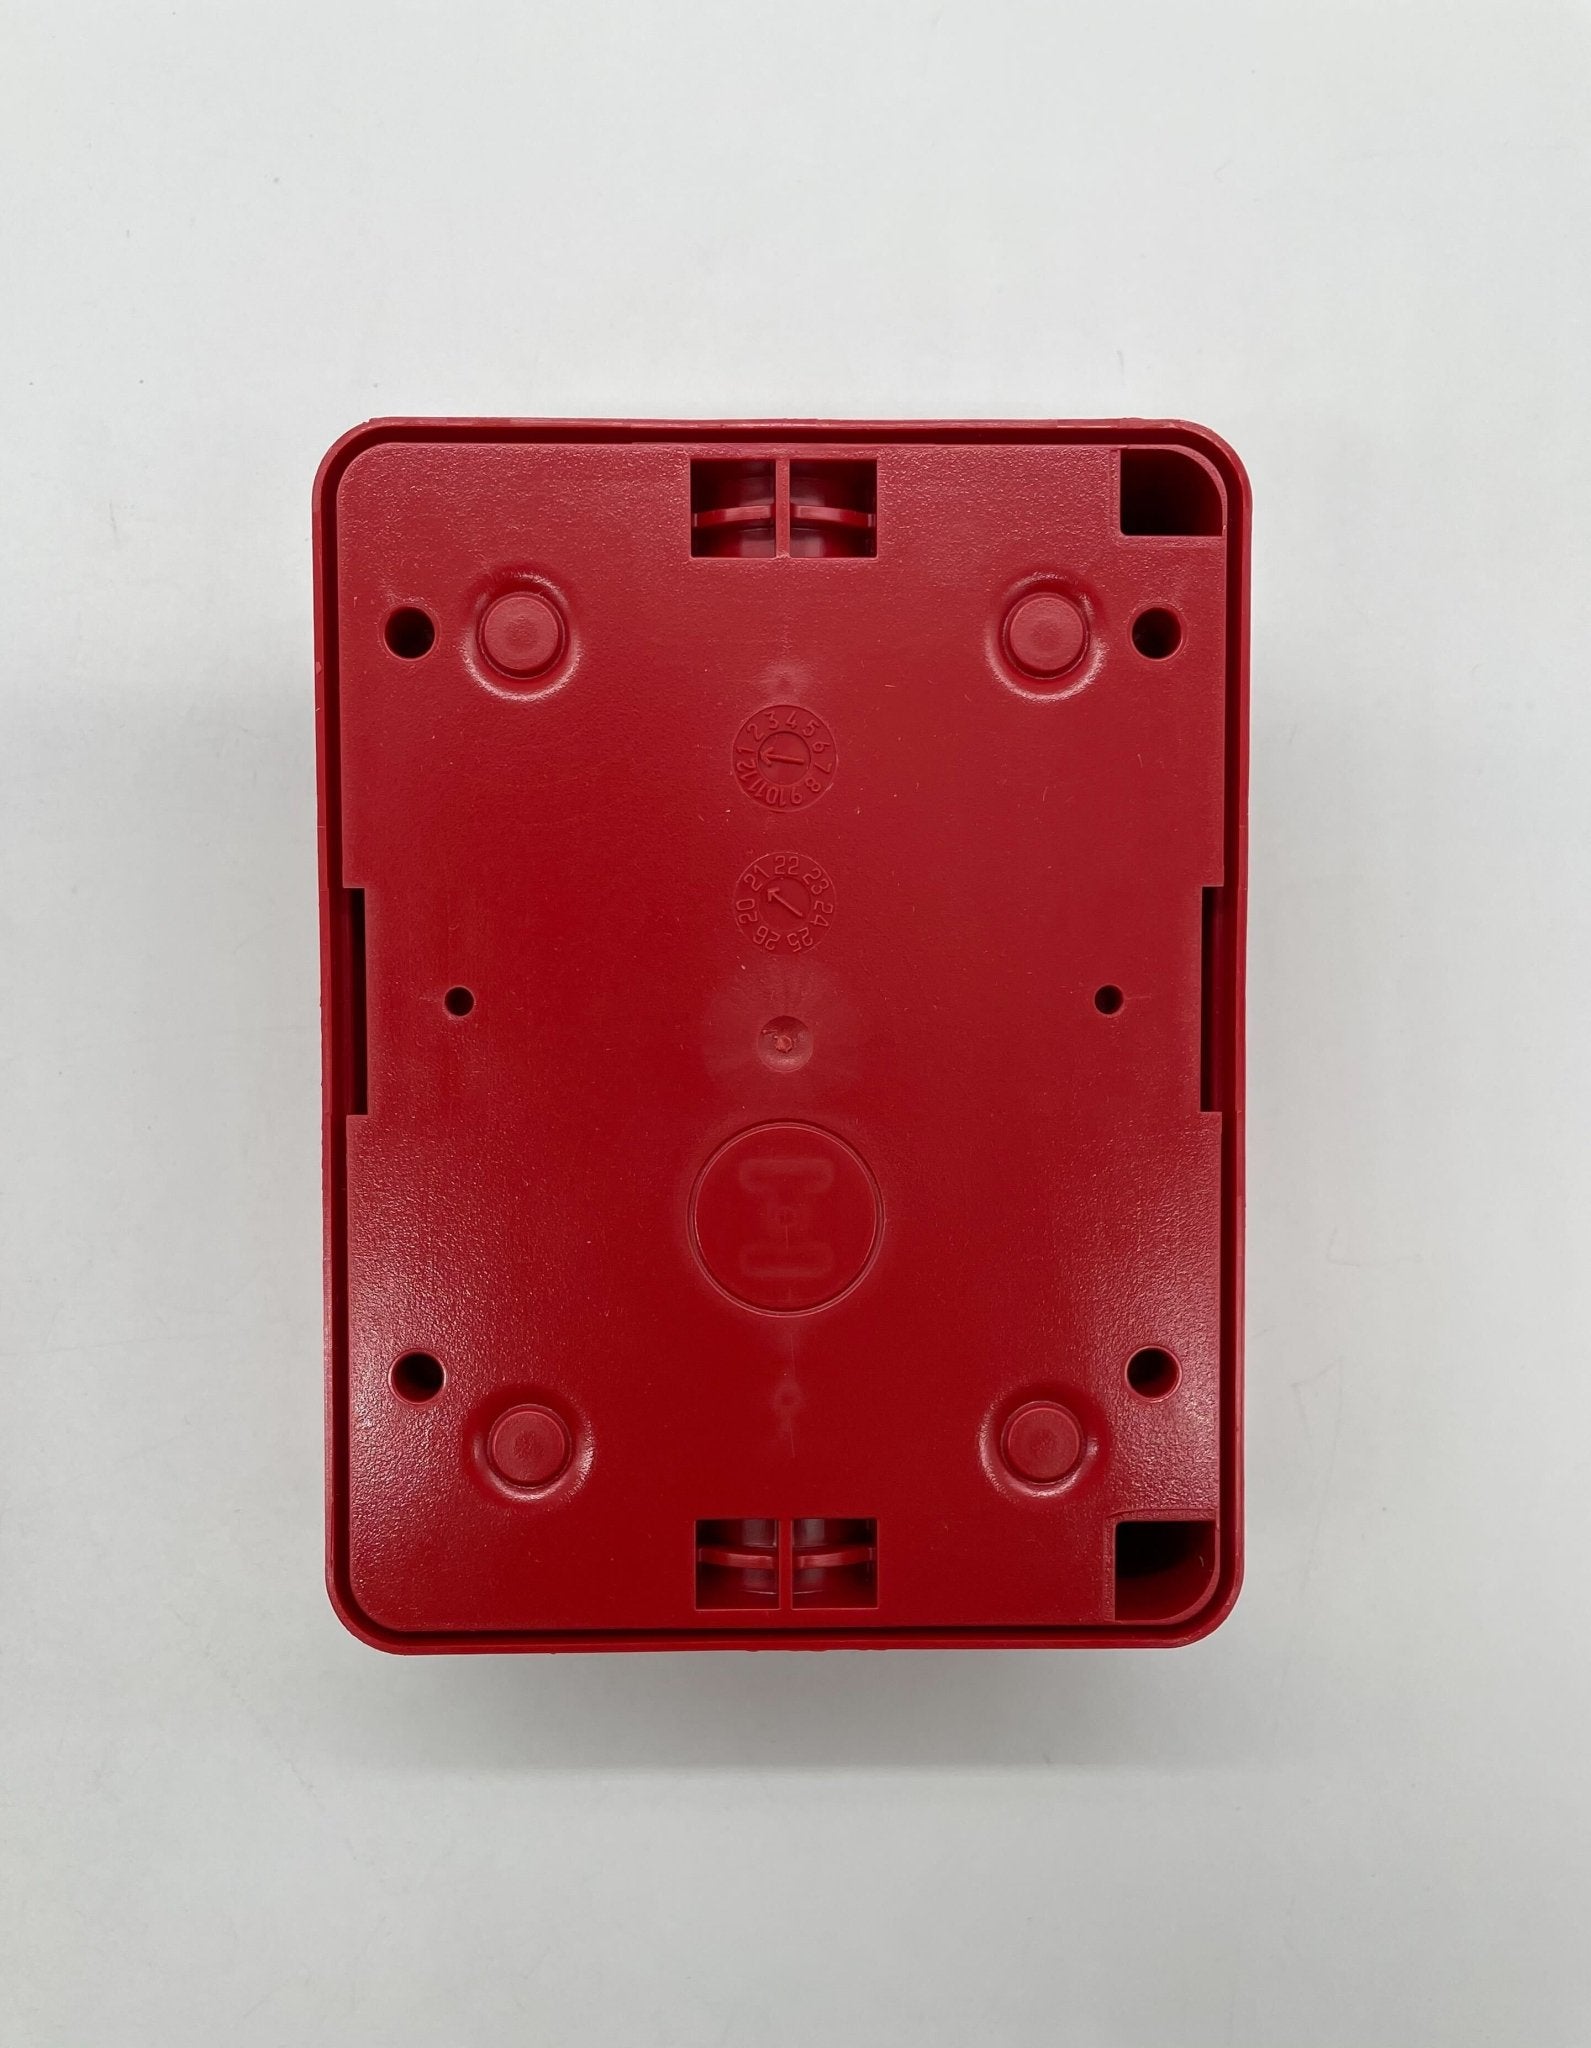 Silent Knight PS-DALOB - The Fire Alarm Supplier